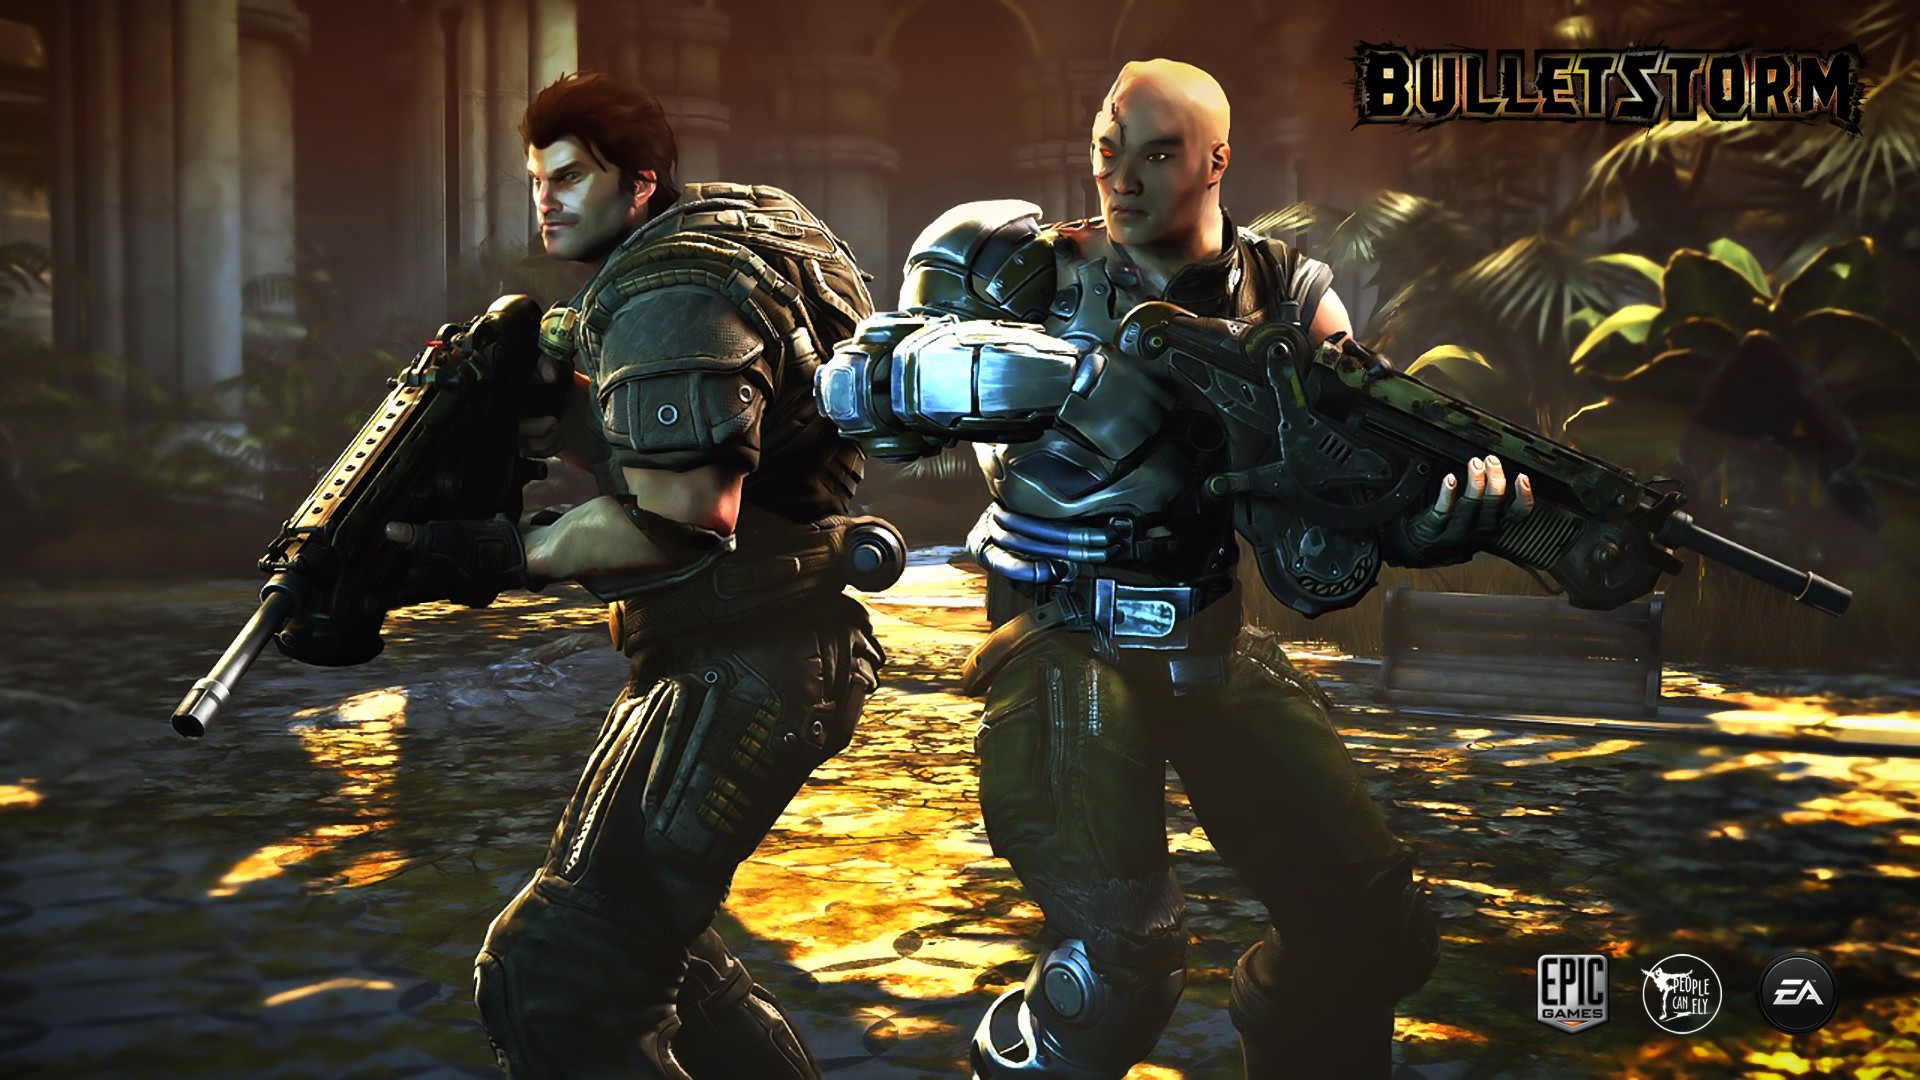  Bulletstorm HQ Background Wallpapers